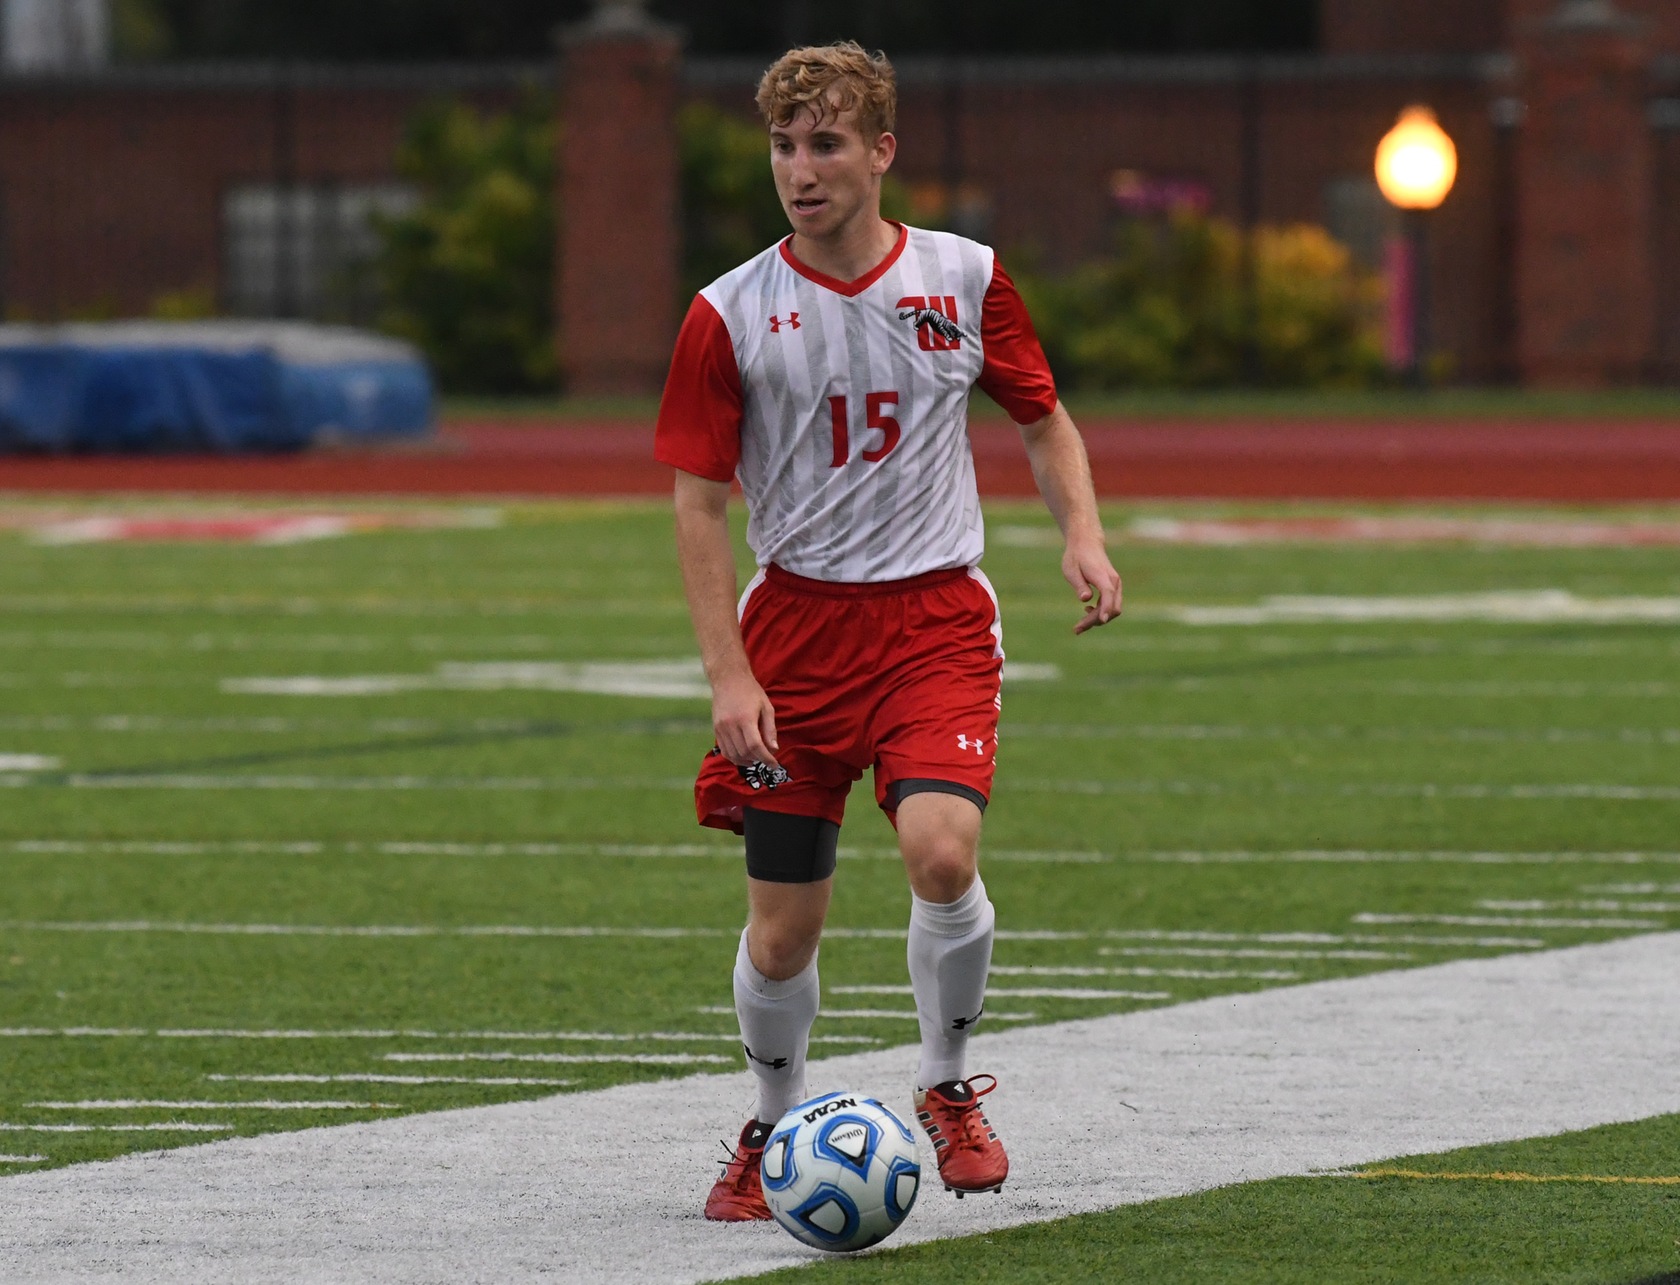 Wittenberg Struggles on the Road, 4-0 Loss